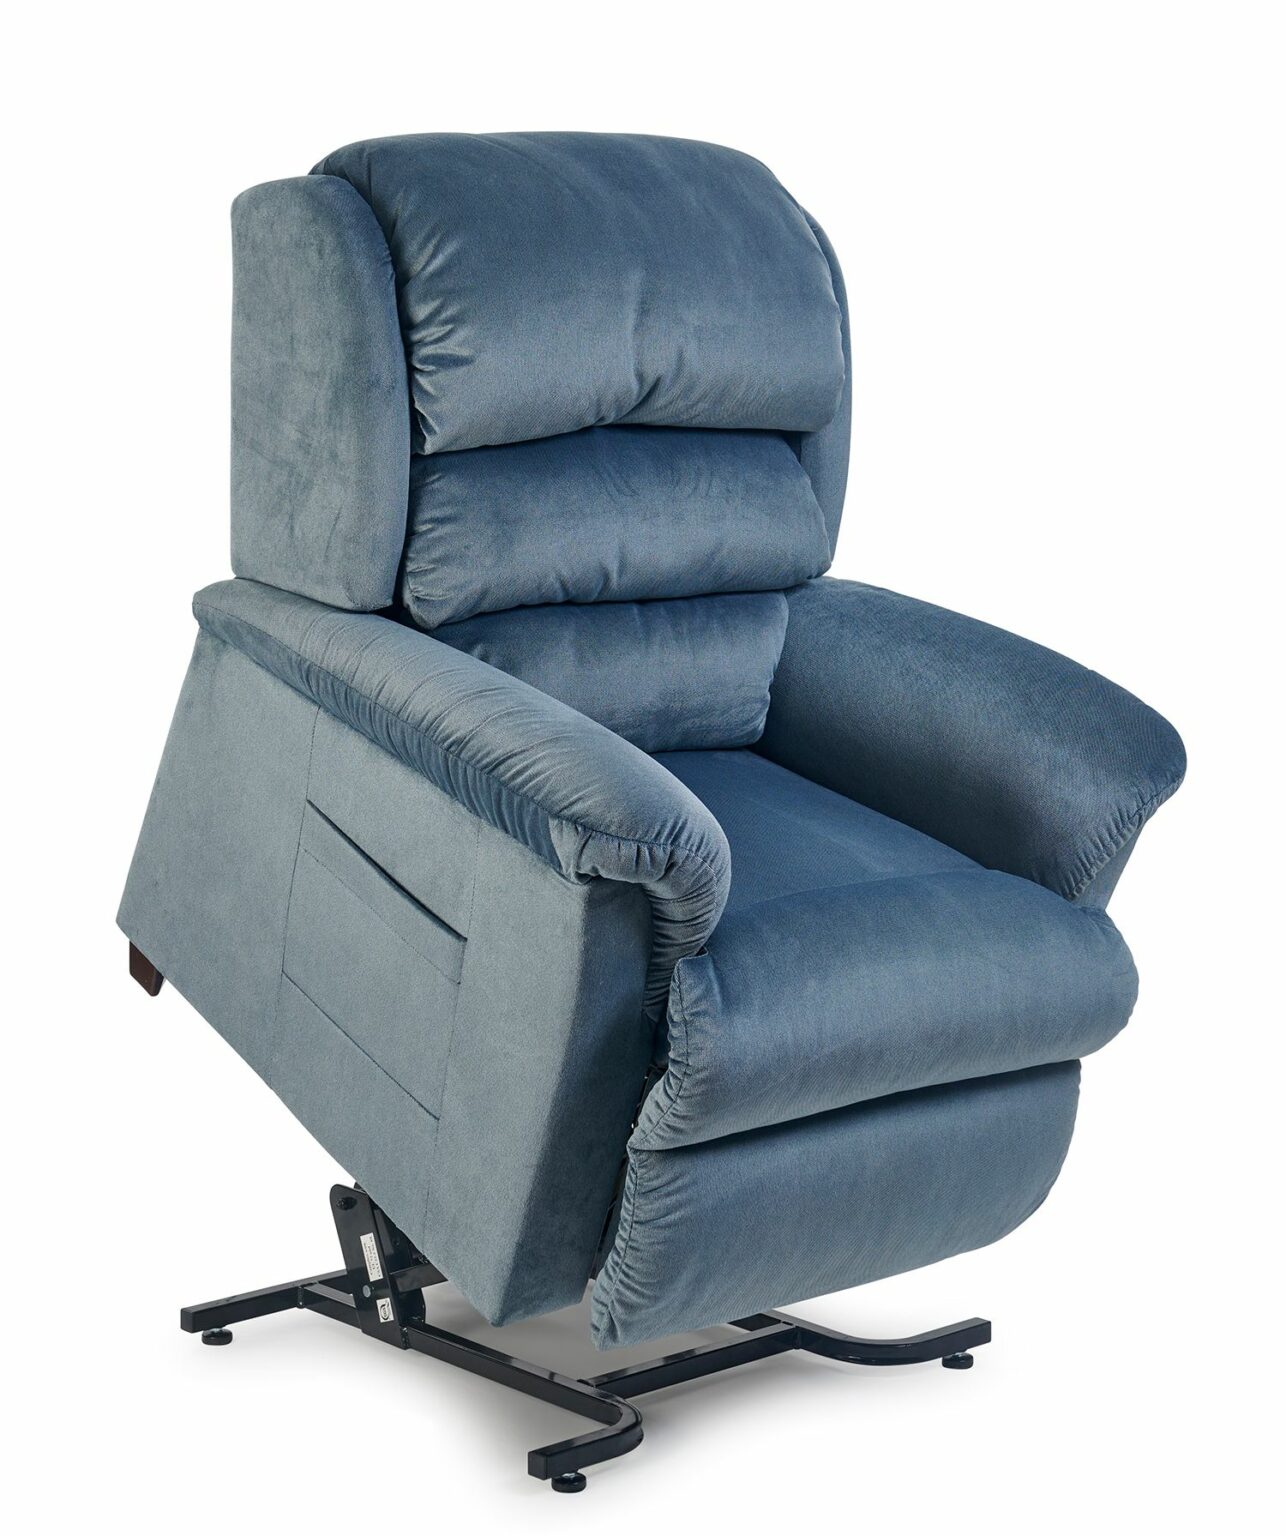 West Covina relaxer seat lift chair reclining zero gravity in West Covina